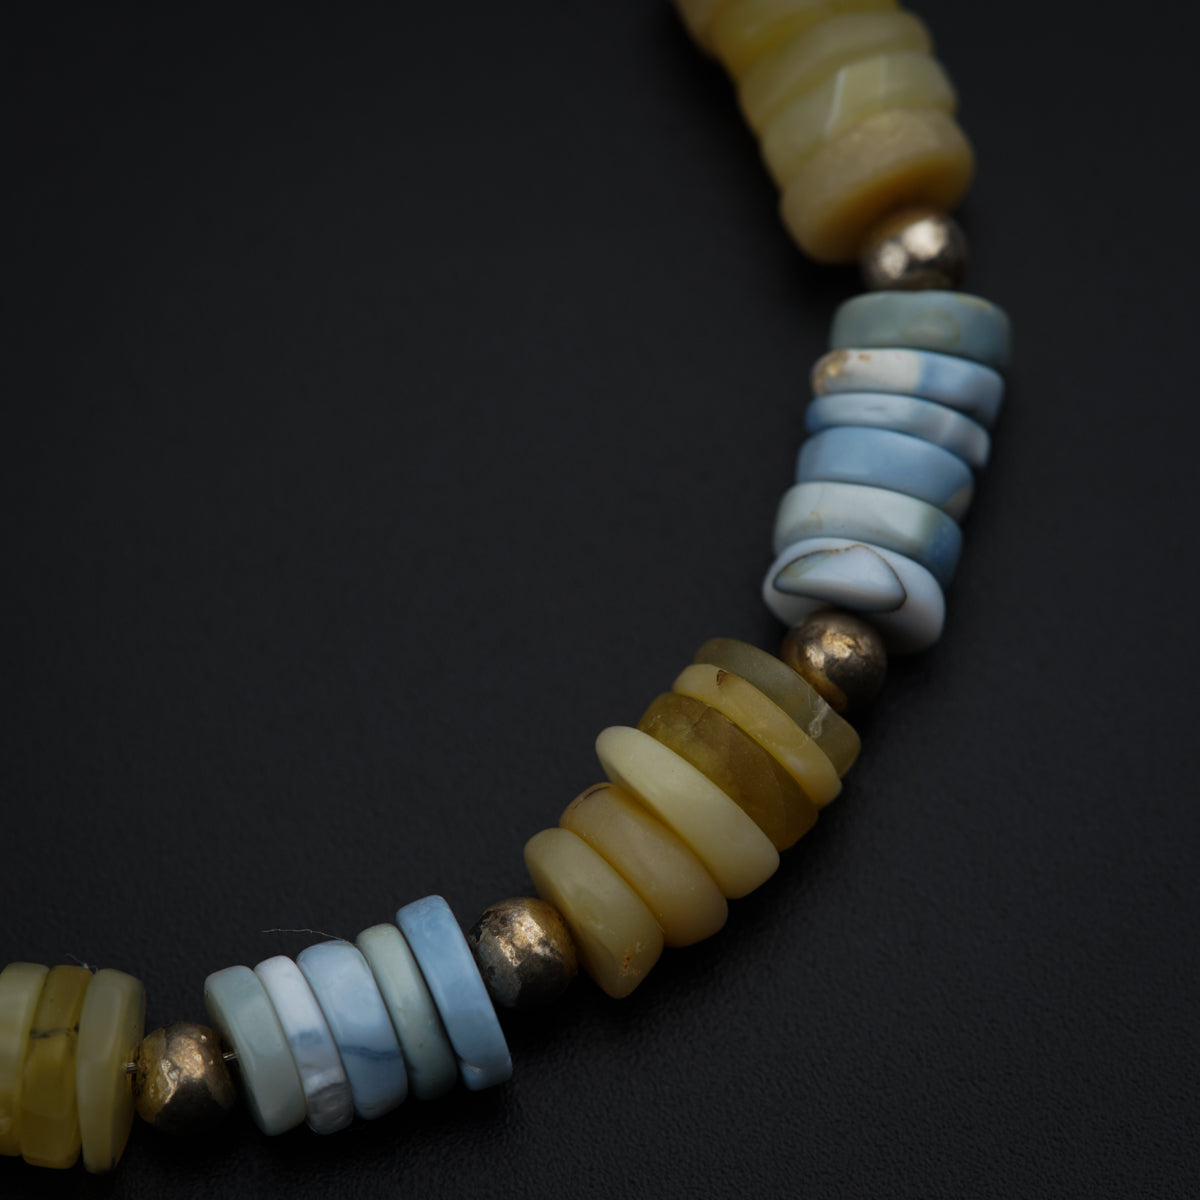 Silver Bracelet with Yellow & Blue Opal